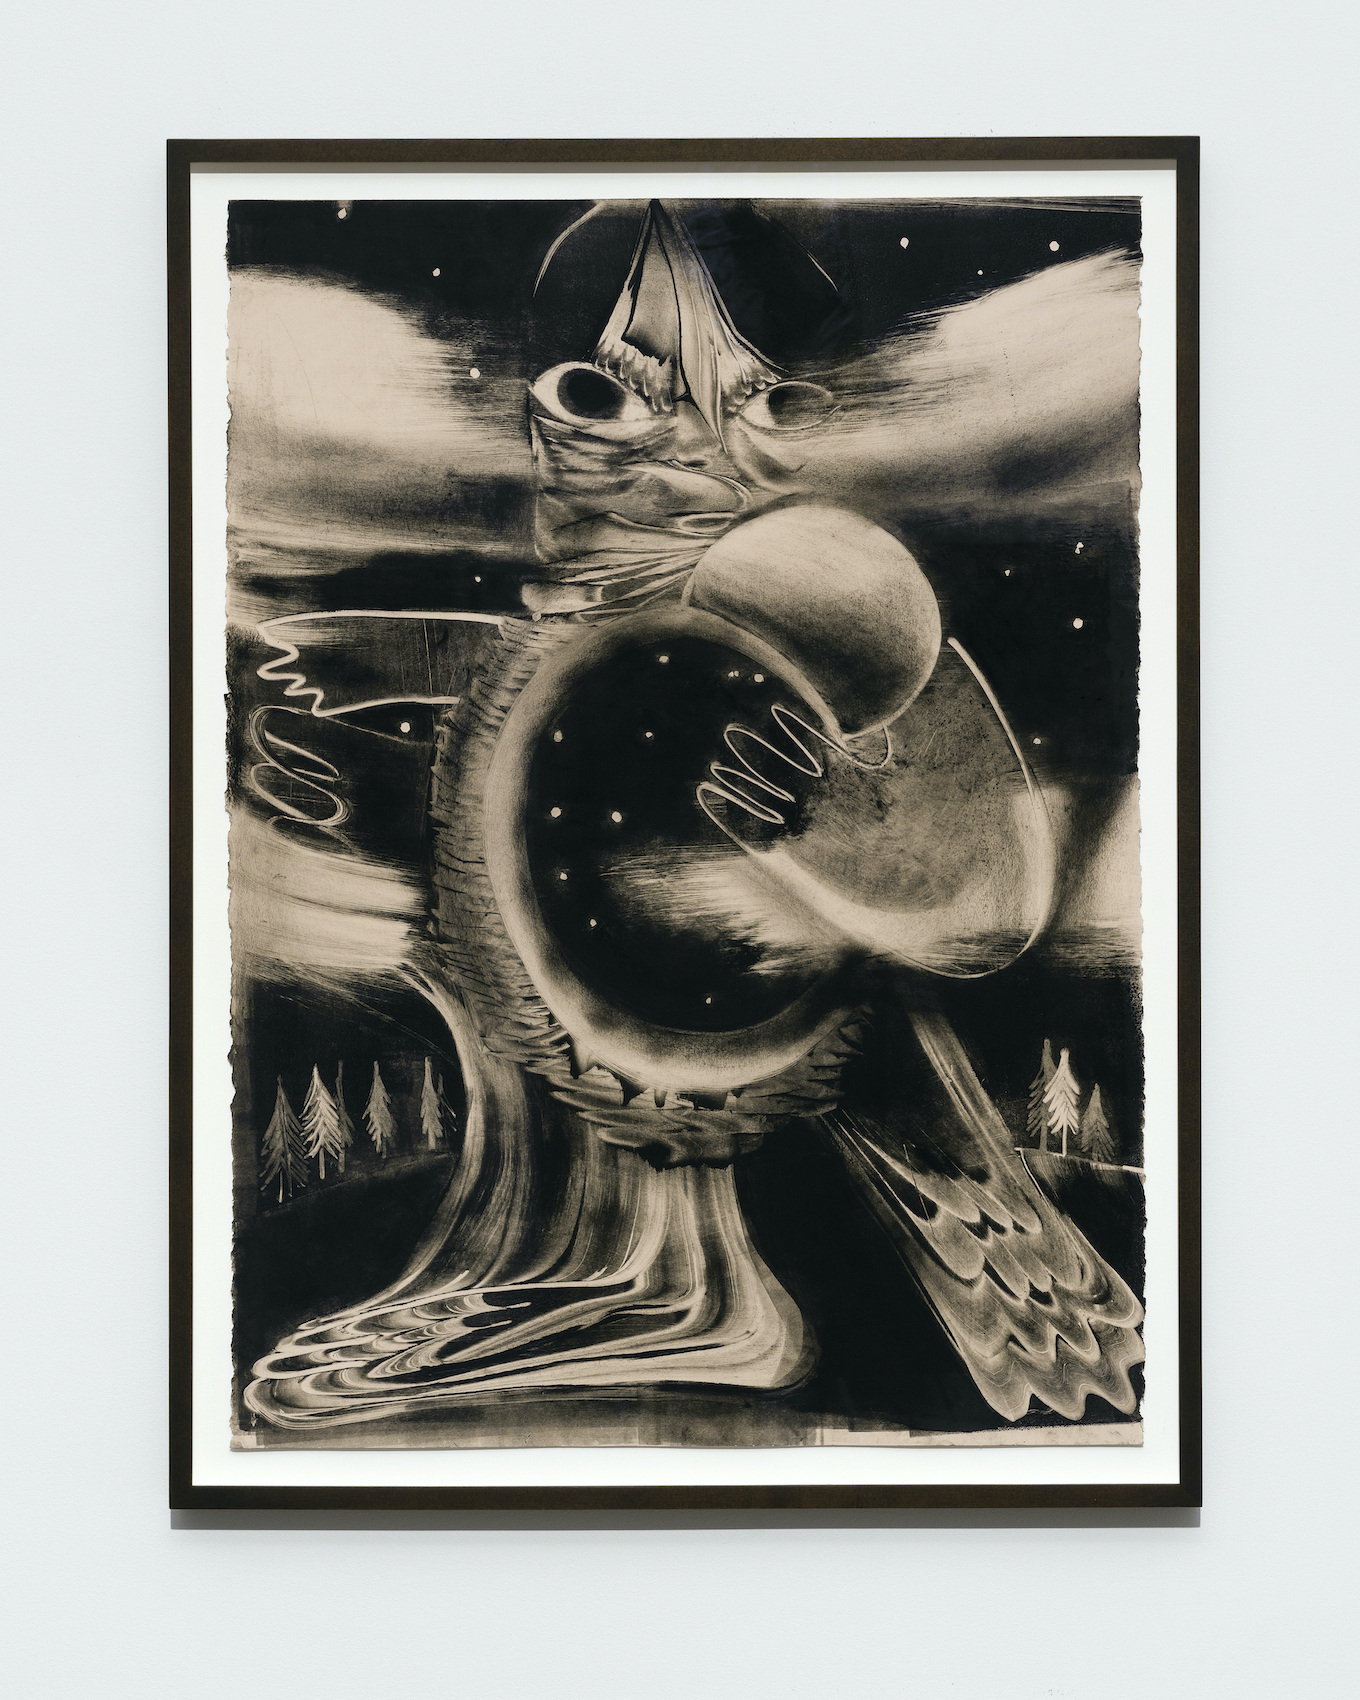 Bea Parsons, Motherload, 2022, Monotype on Stonehenge paper, 30 x 22 inches, edition 1/1